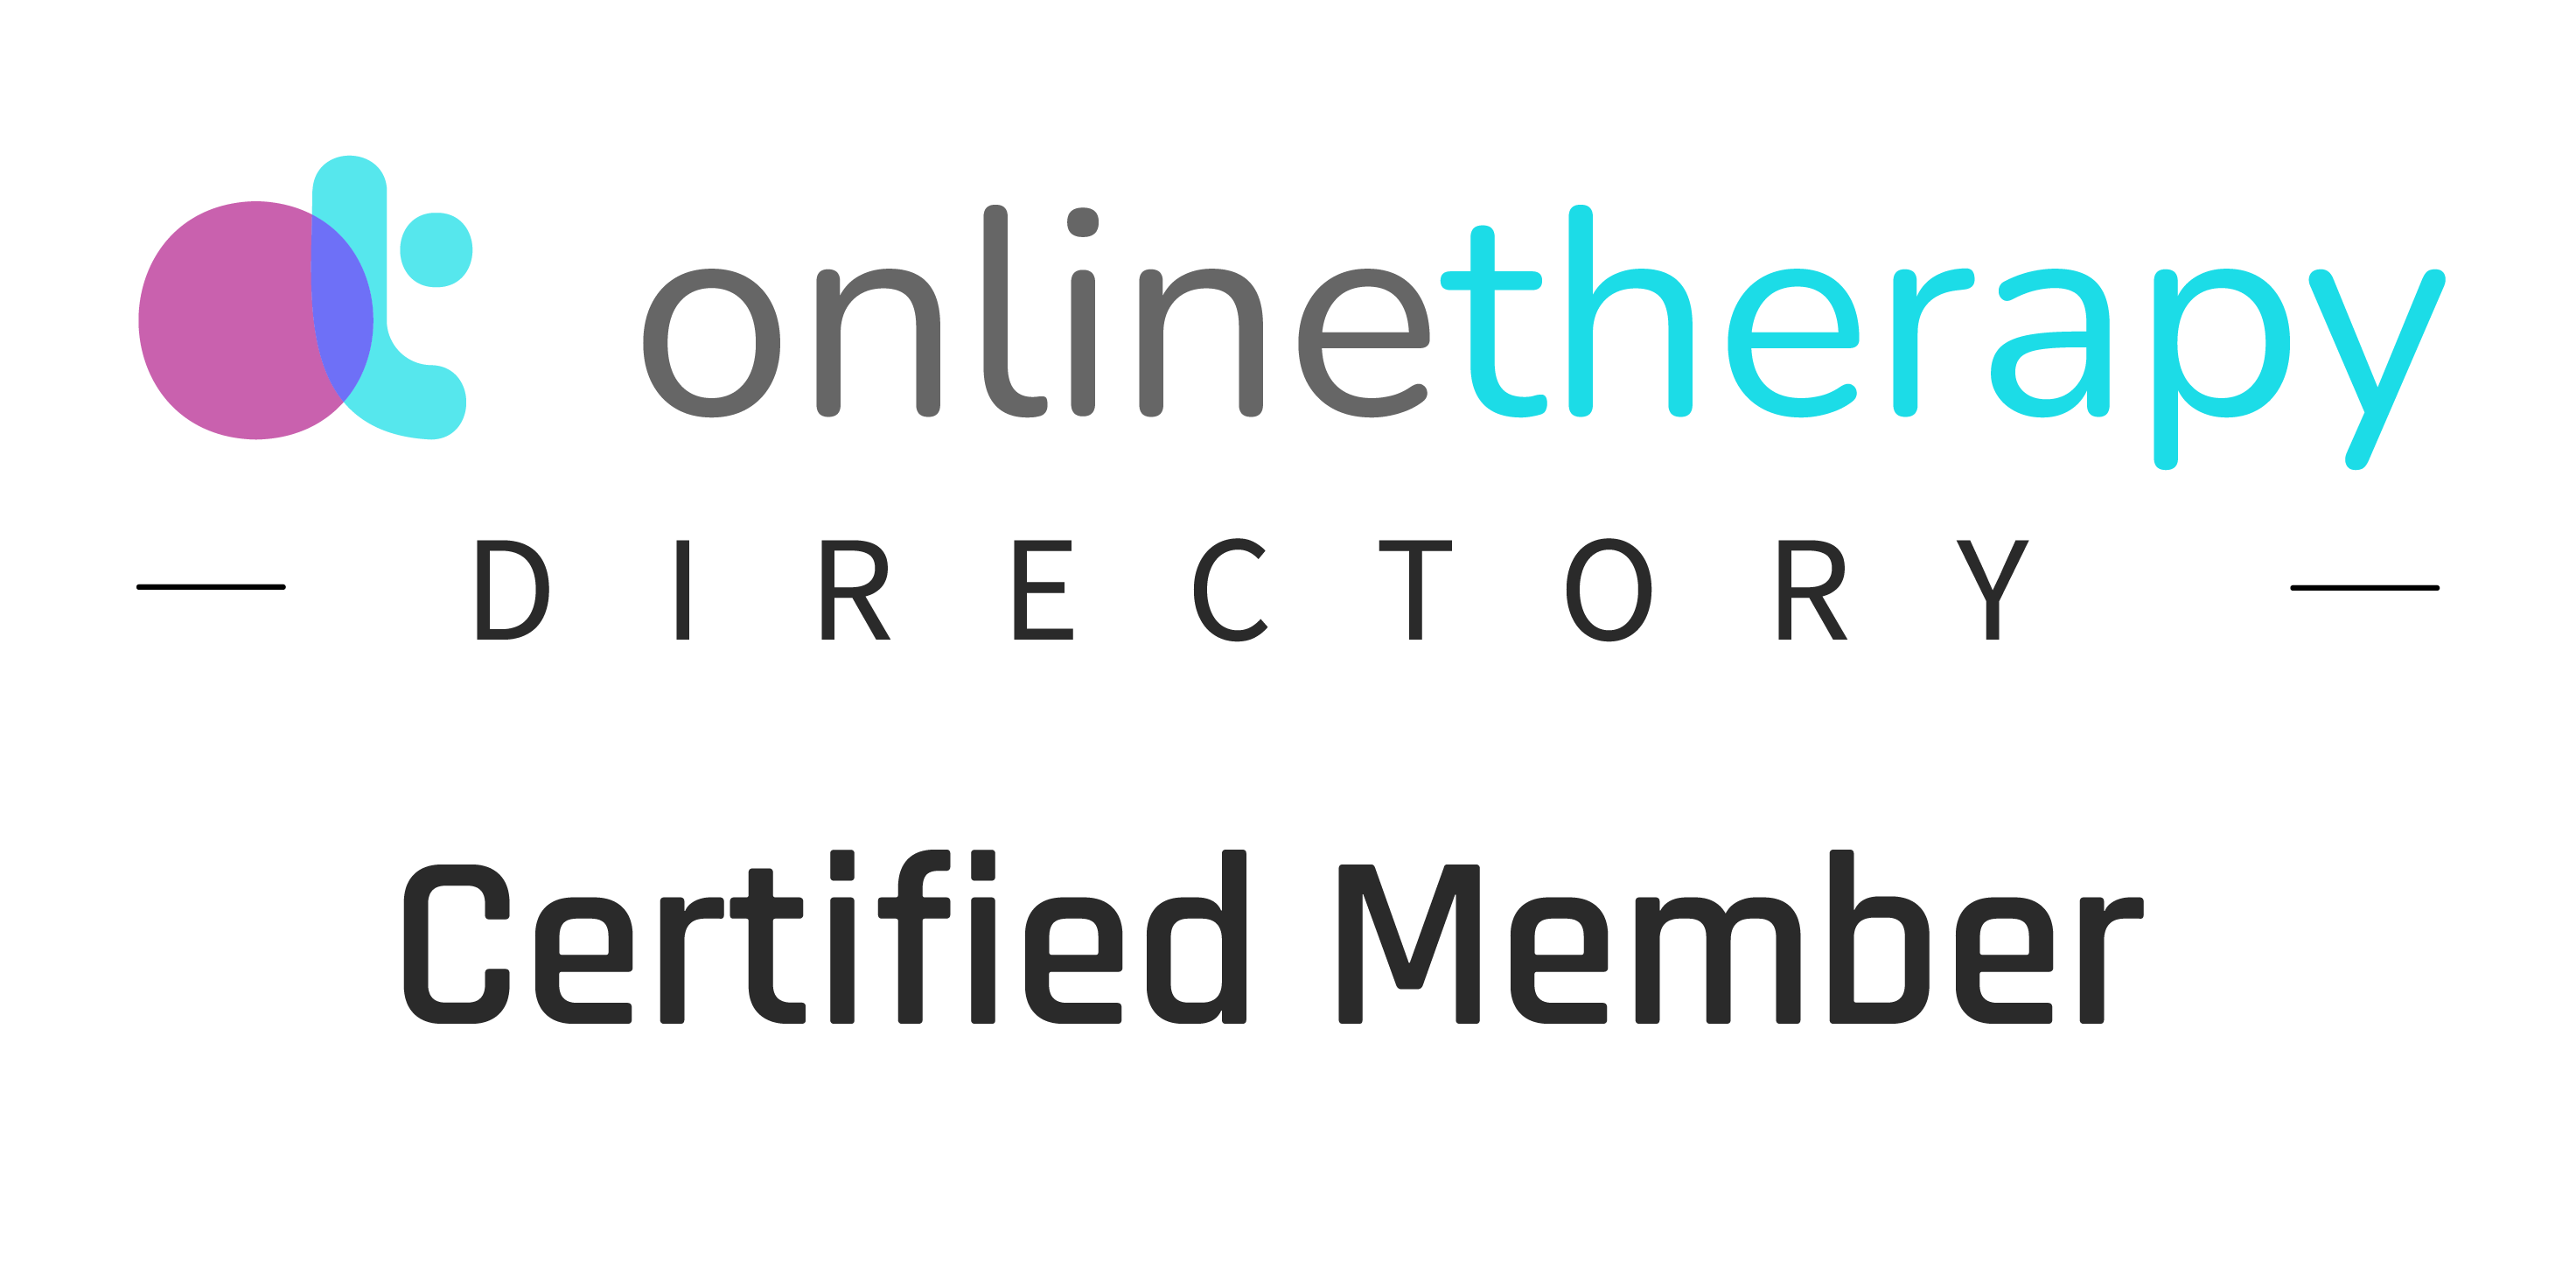 online therapy directory certified member